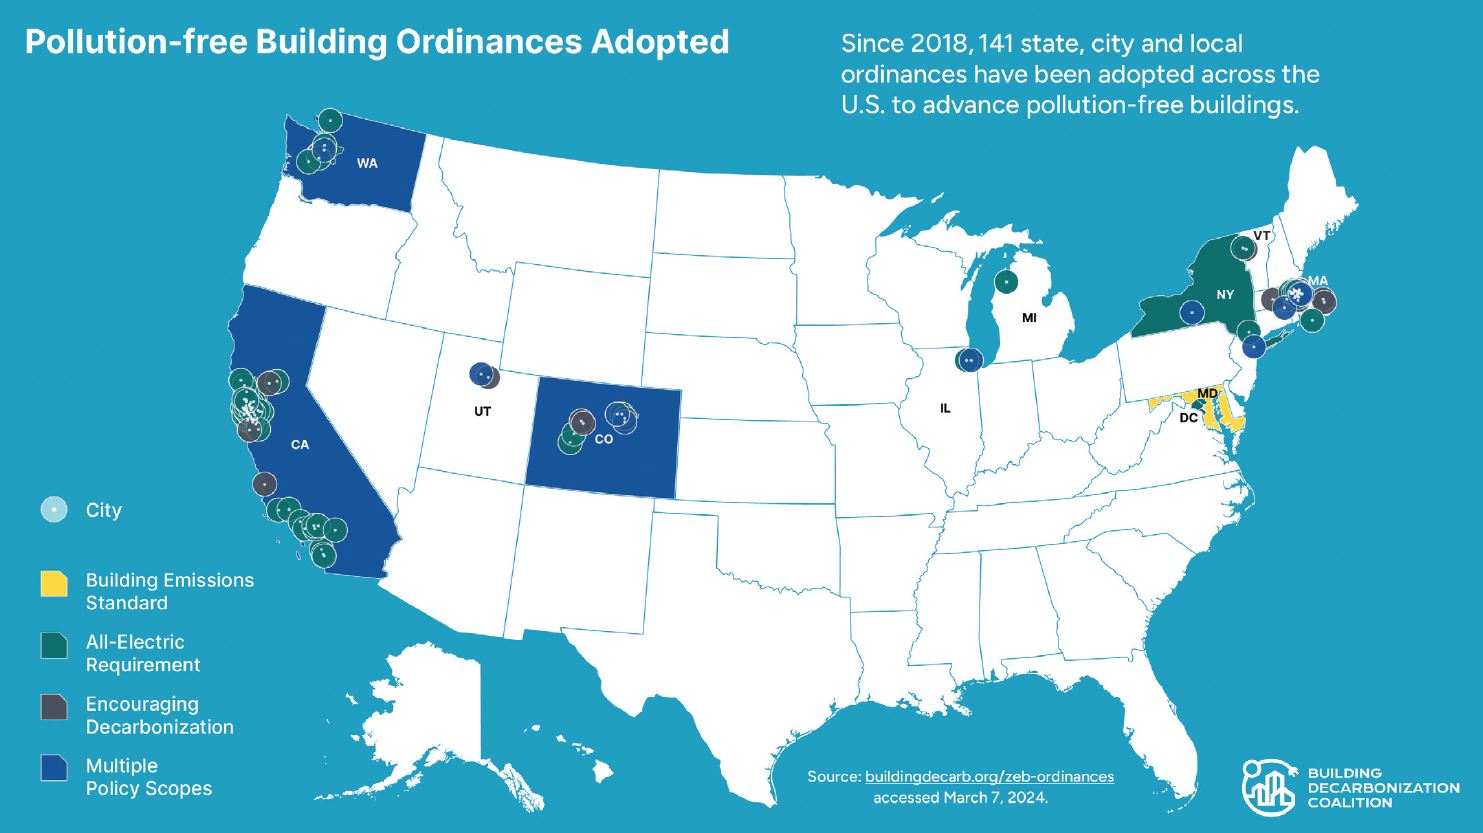 Pollution Free Building Ordinances Adopted Map of the United States.